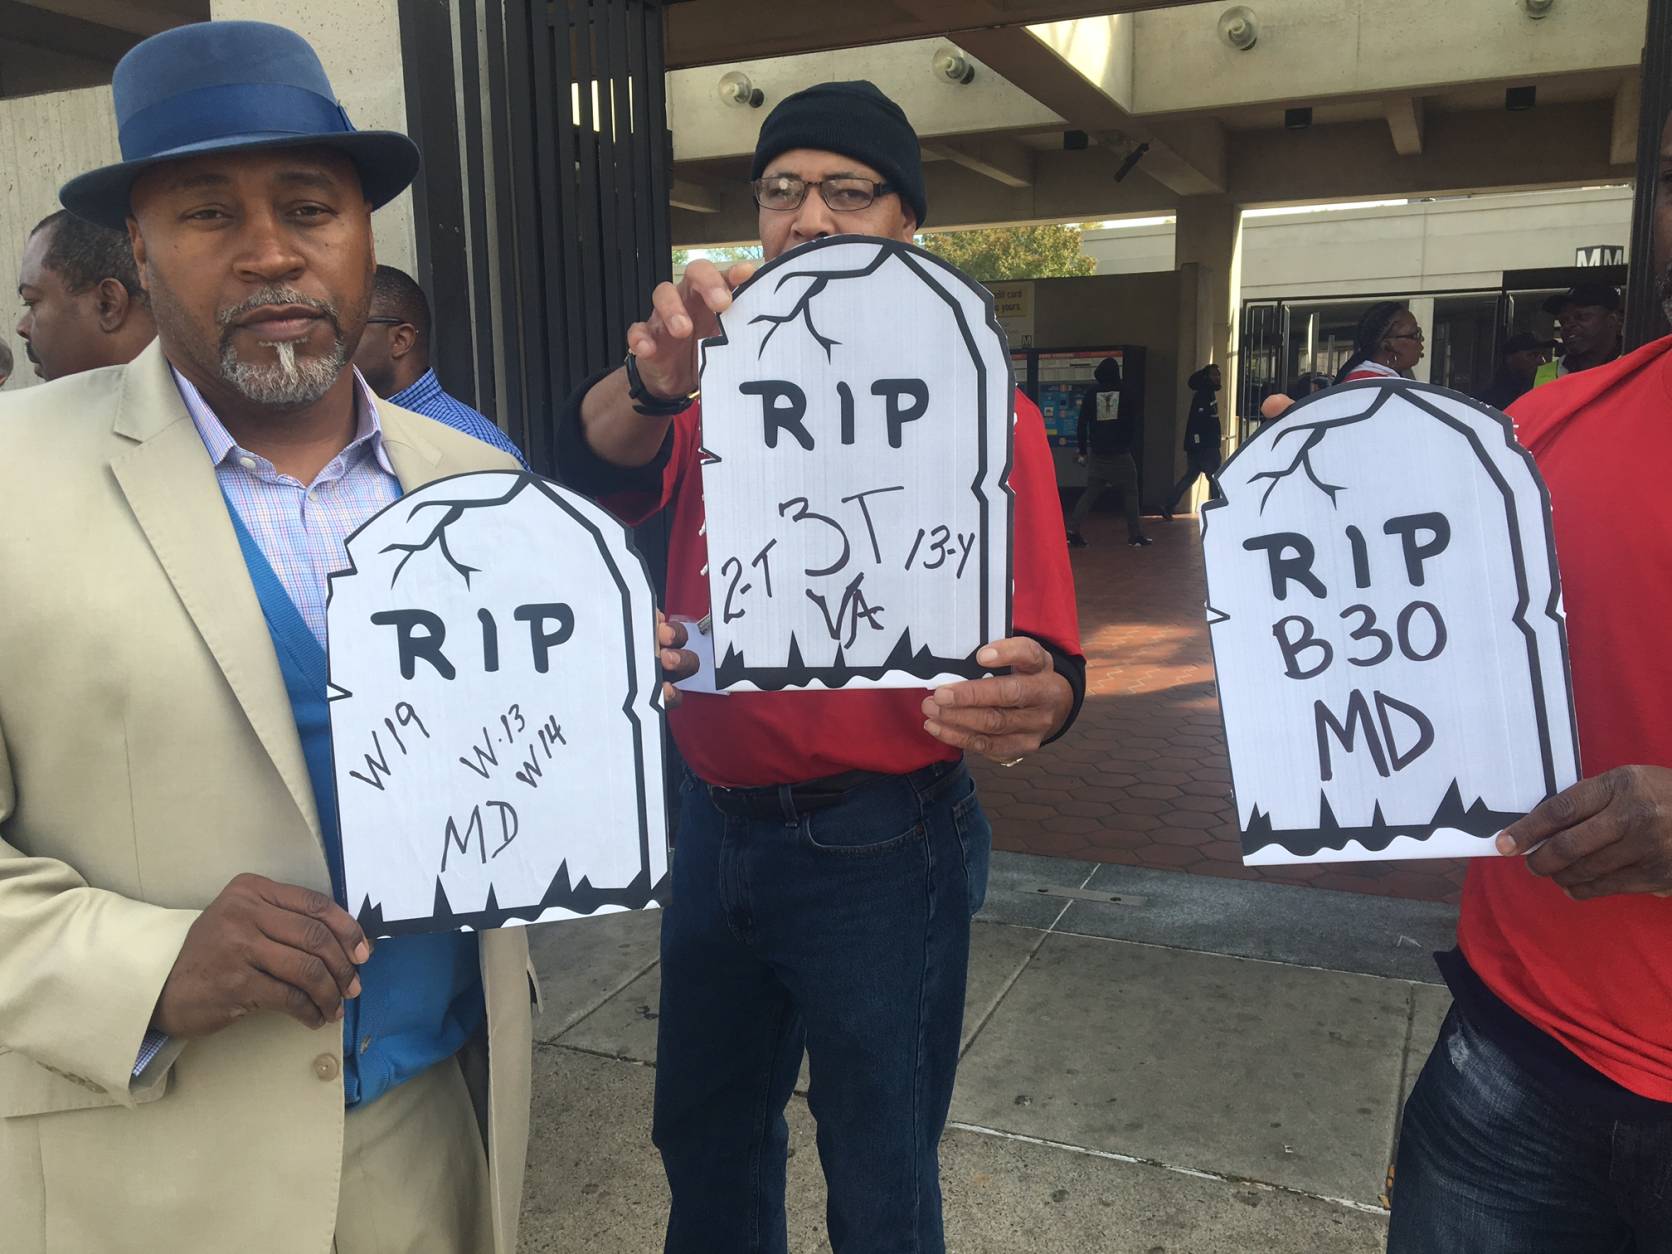 Members of Metro's largest union, Amalgamated Transit Union Local 689 hold up "grave stones" during a rally on Monday, Oct. 31, 2016 outside Southern Avenue Metro station in Prince George's County, Md. (WTOP/Max Smith)